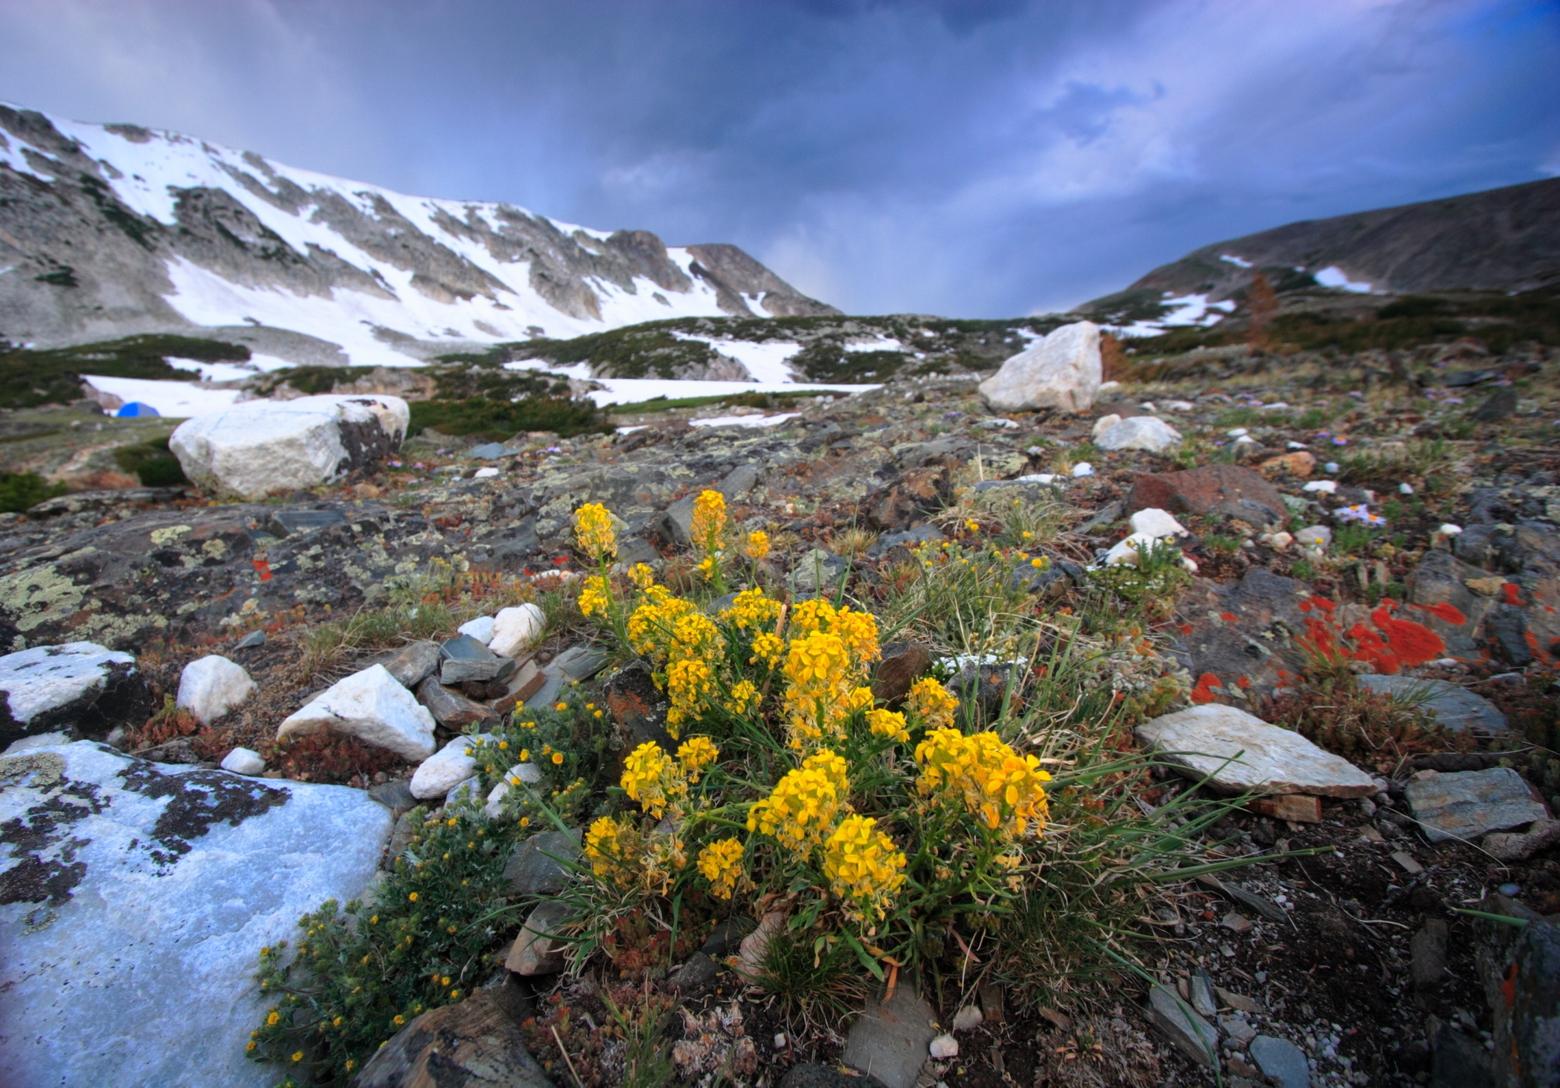 A first blush of hardy wildflowers in the mountains of Wyoming. No matter how how formidable a winter, eventually new live defies the snow and all trails lead back to nature. Photo Shutterstock/ 73301875 